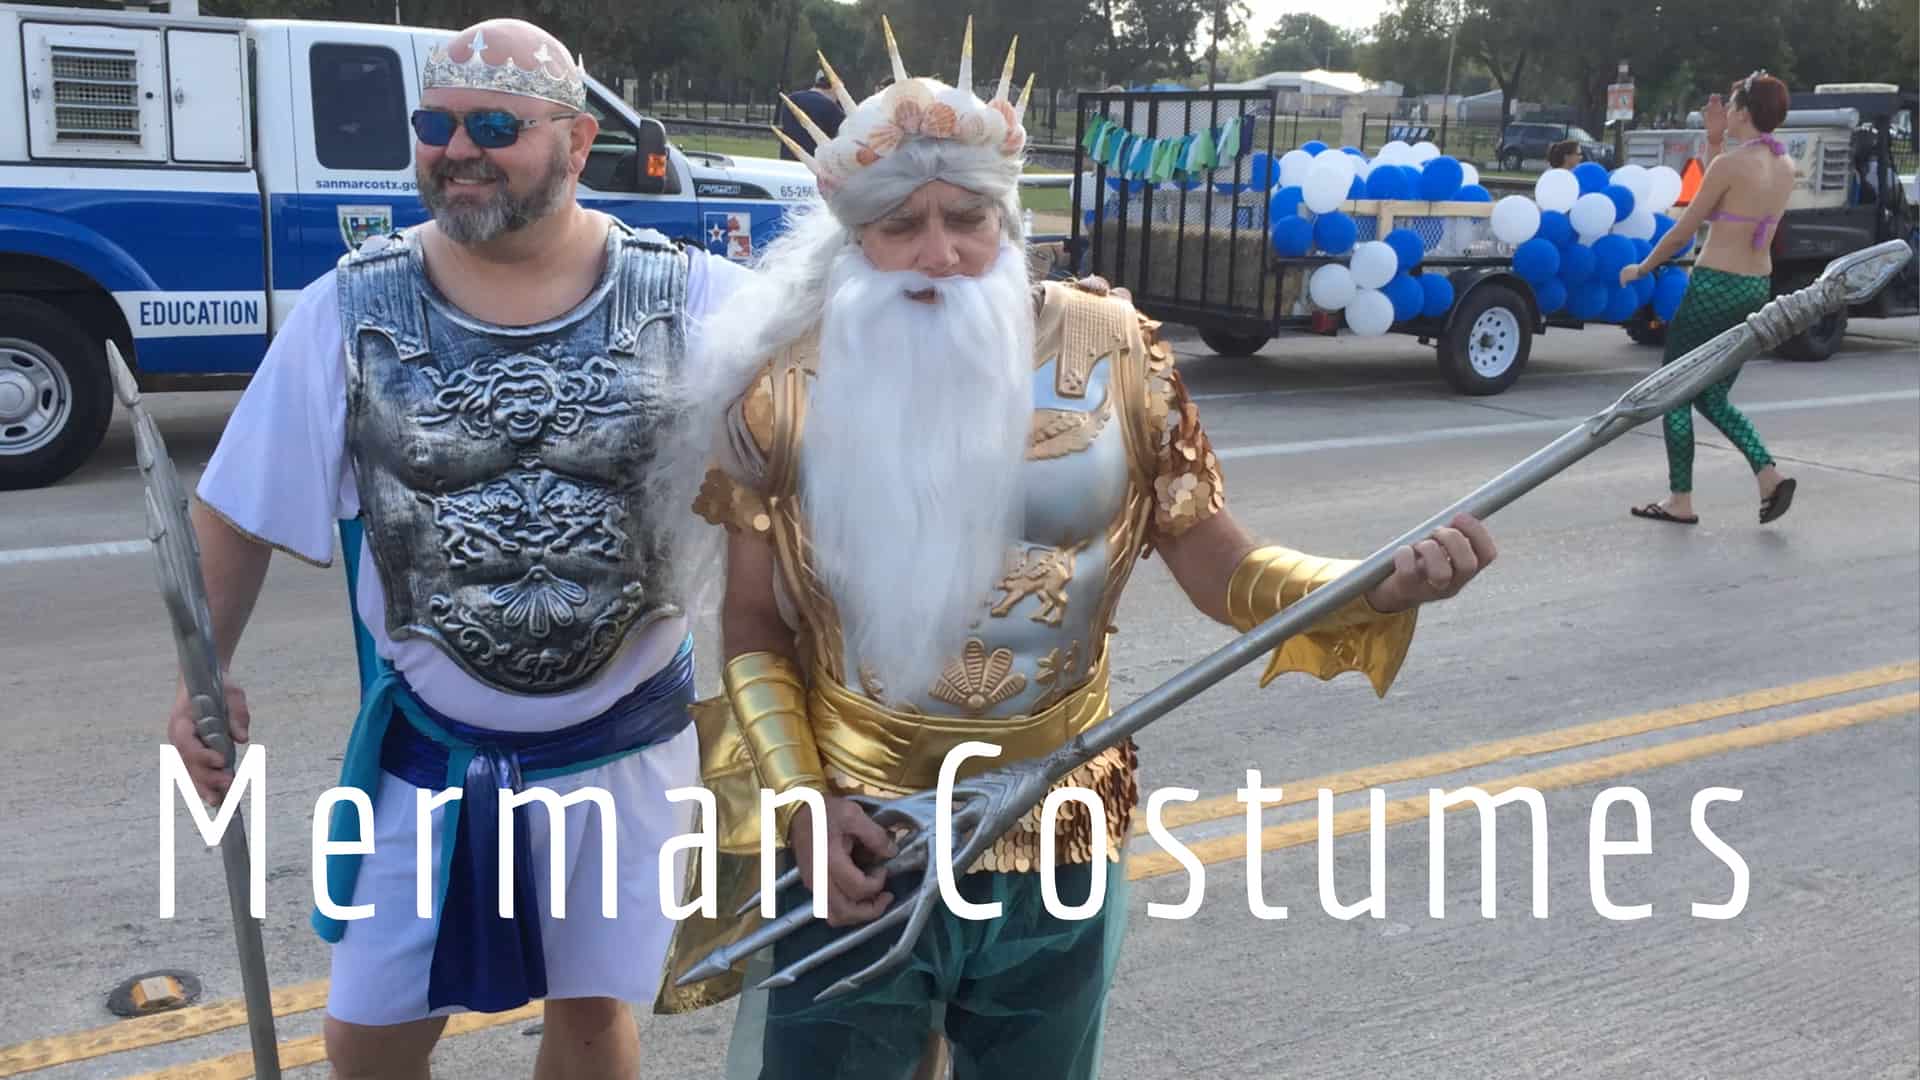 MerMan Costumes - Ideas And Inspirations For Parties and Parades